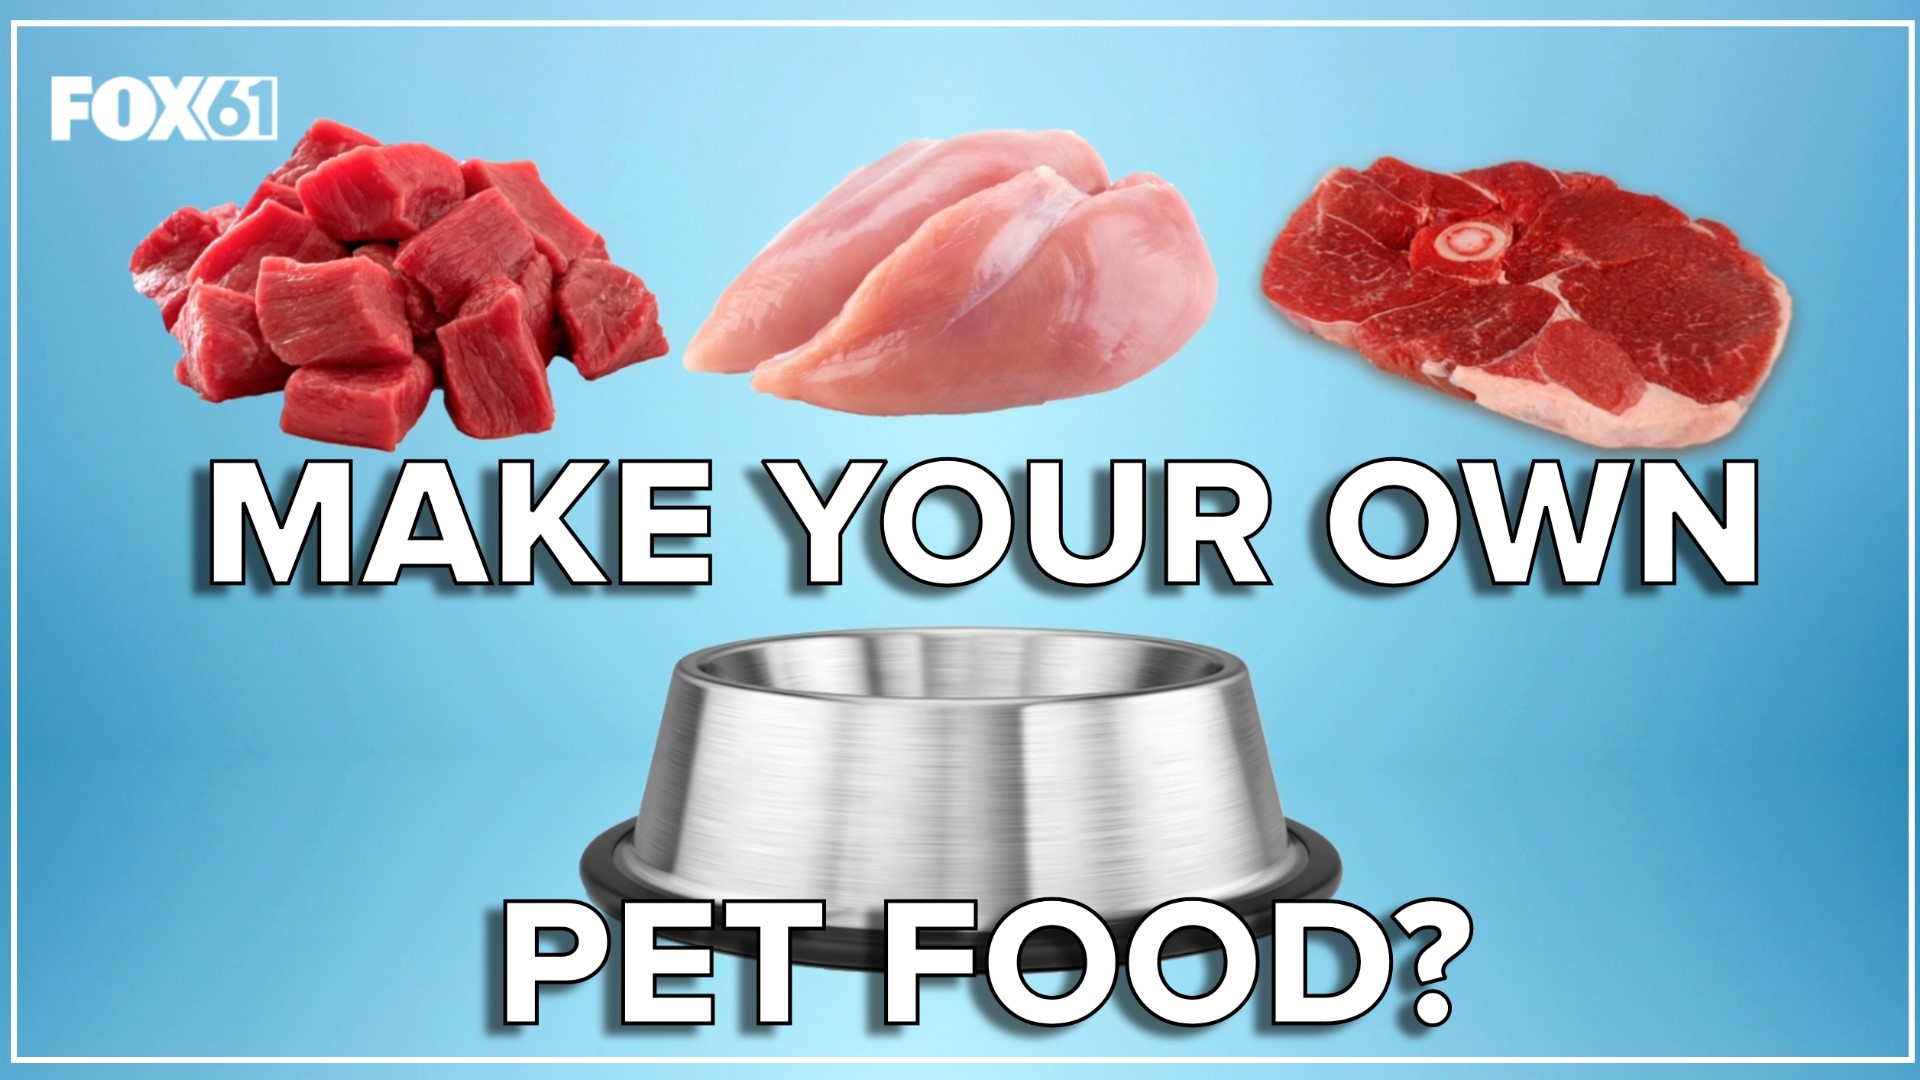 From switching brands to going the homemade route, there are options out there for pet owners still searching for the food their pets are used to.